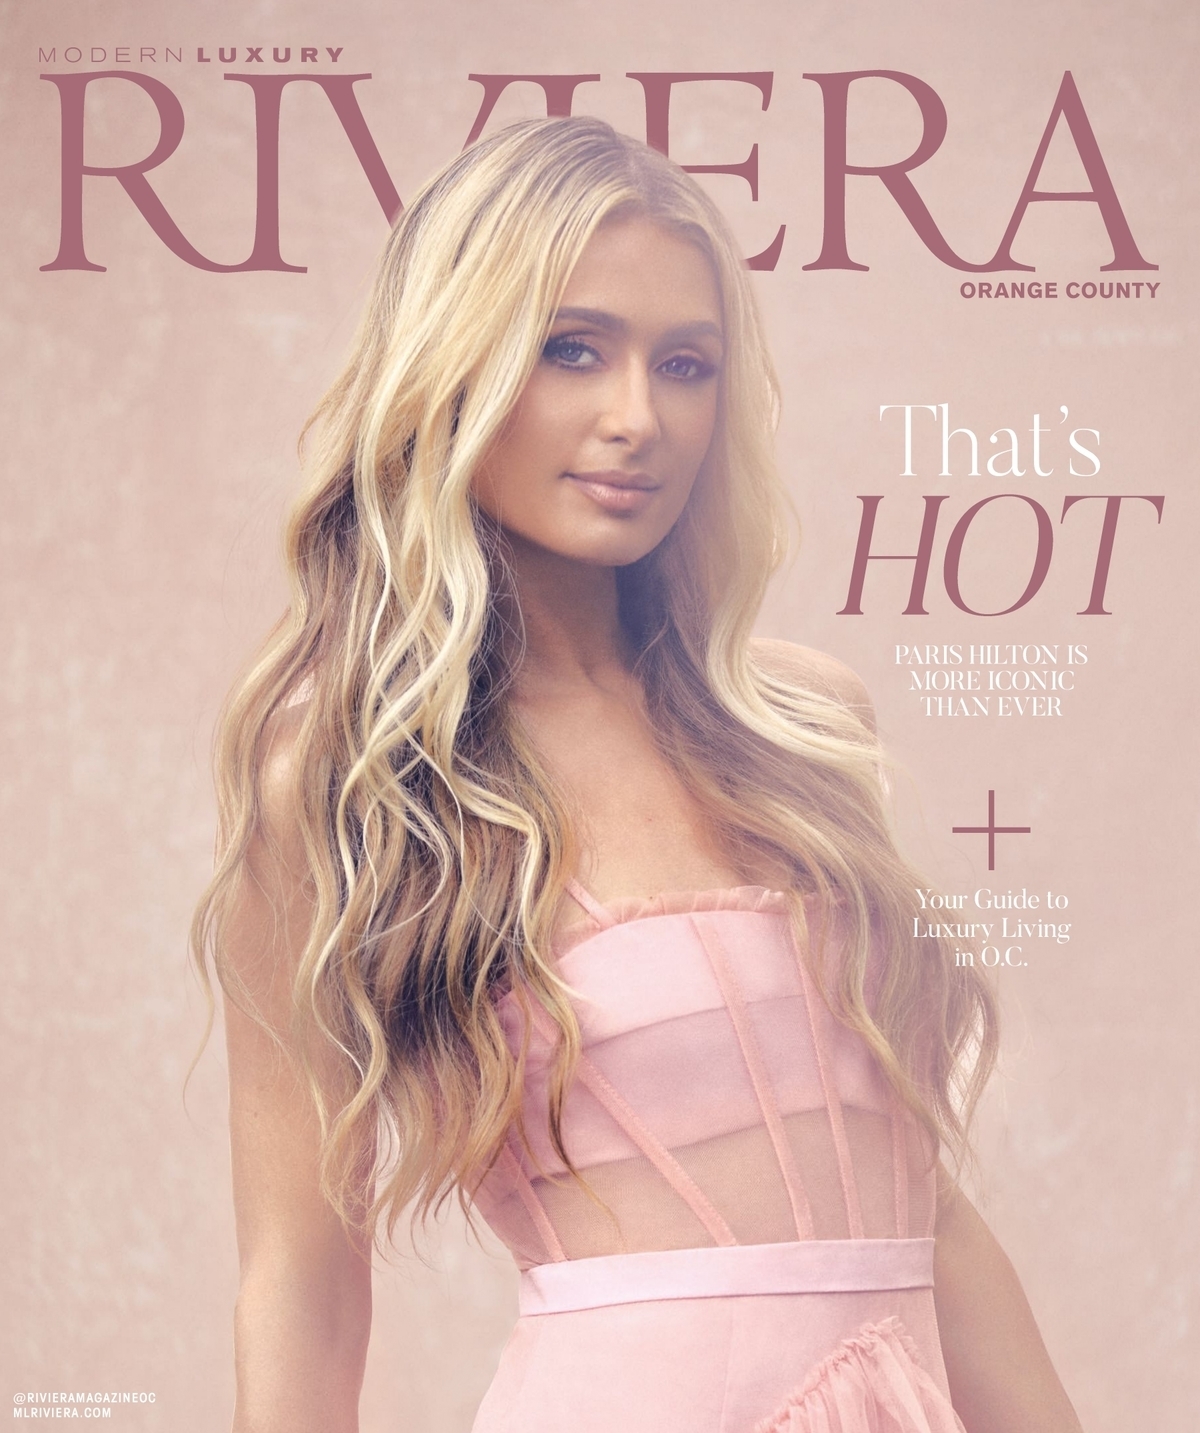 Dr. Ambe Featured as Orange County's Best Facial Plastic Surgeon in Riviera Modern Luxury Magazine August 2022